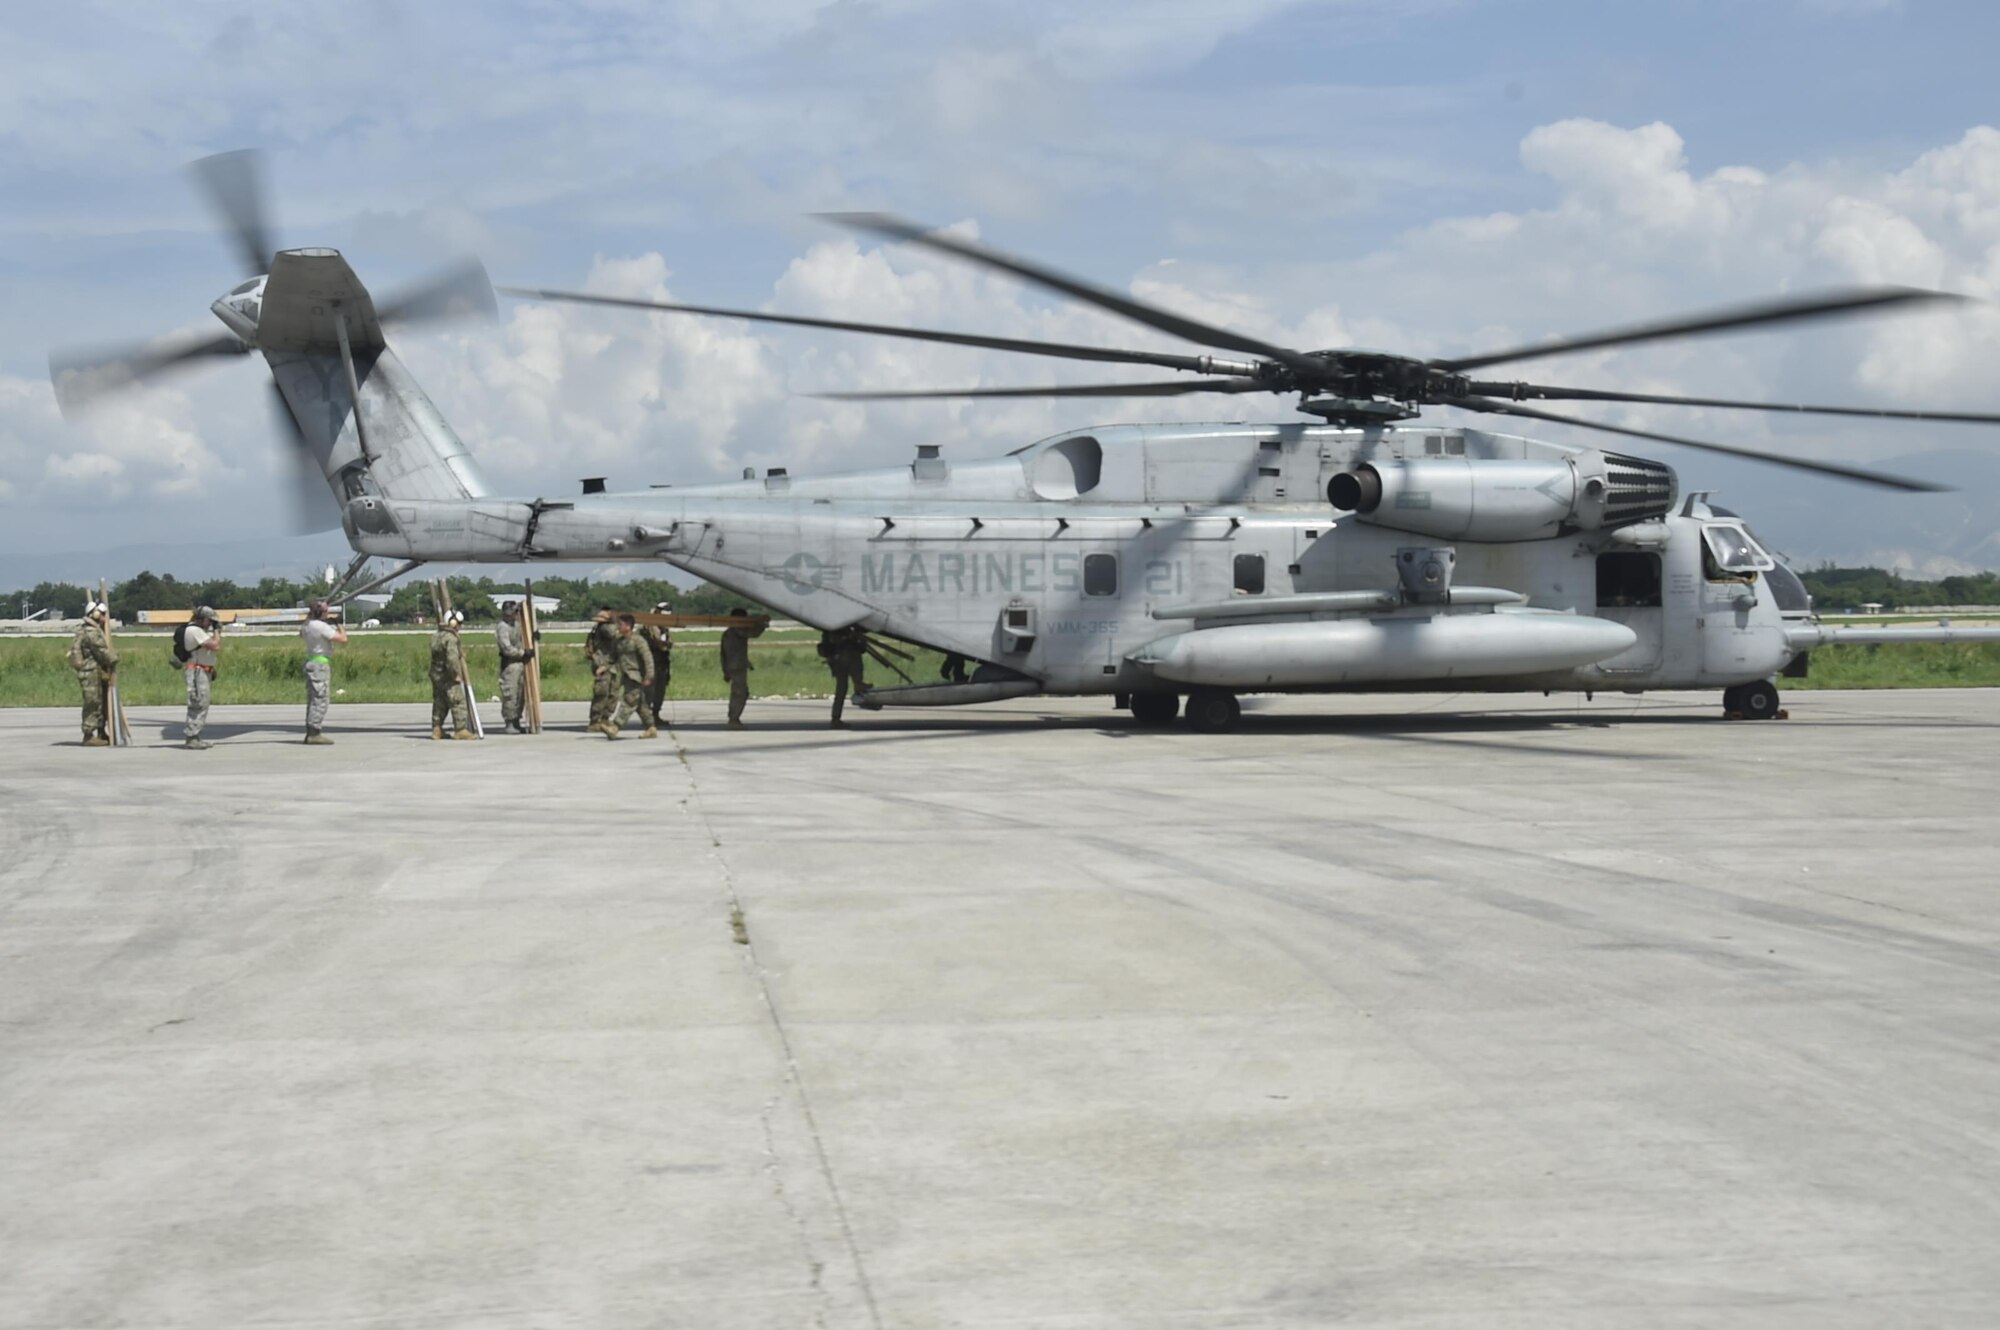 Airmen from the 621st Contingency Response Wing work with Marines from the Special Purpose Marine Air-Ground Task Force-South Command at Port-au-Prince, Haiti, October 10th, 2016.The CRW provides assistance by facilitating the flow of aid and cargo to those in need. (U.S. Air Force photo by Staff Sgt. Robert Waggoner/released)